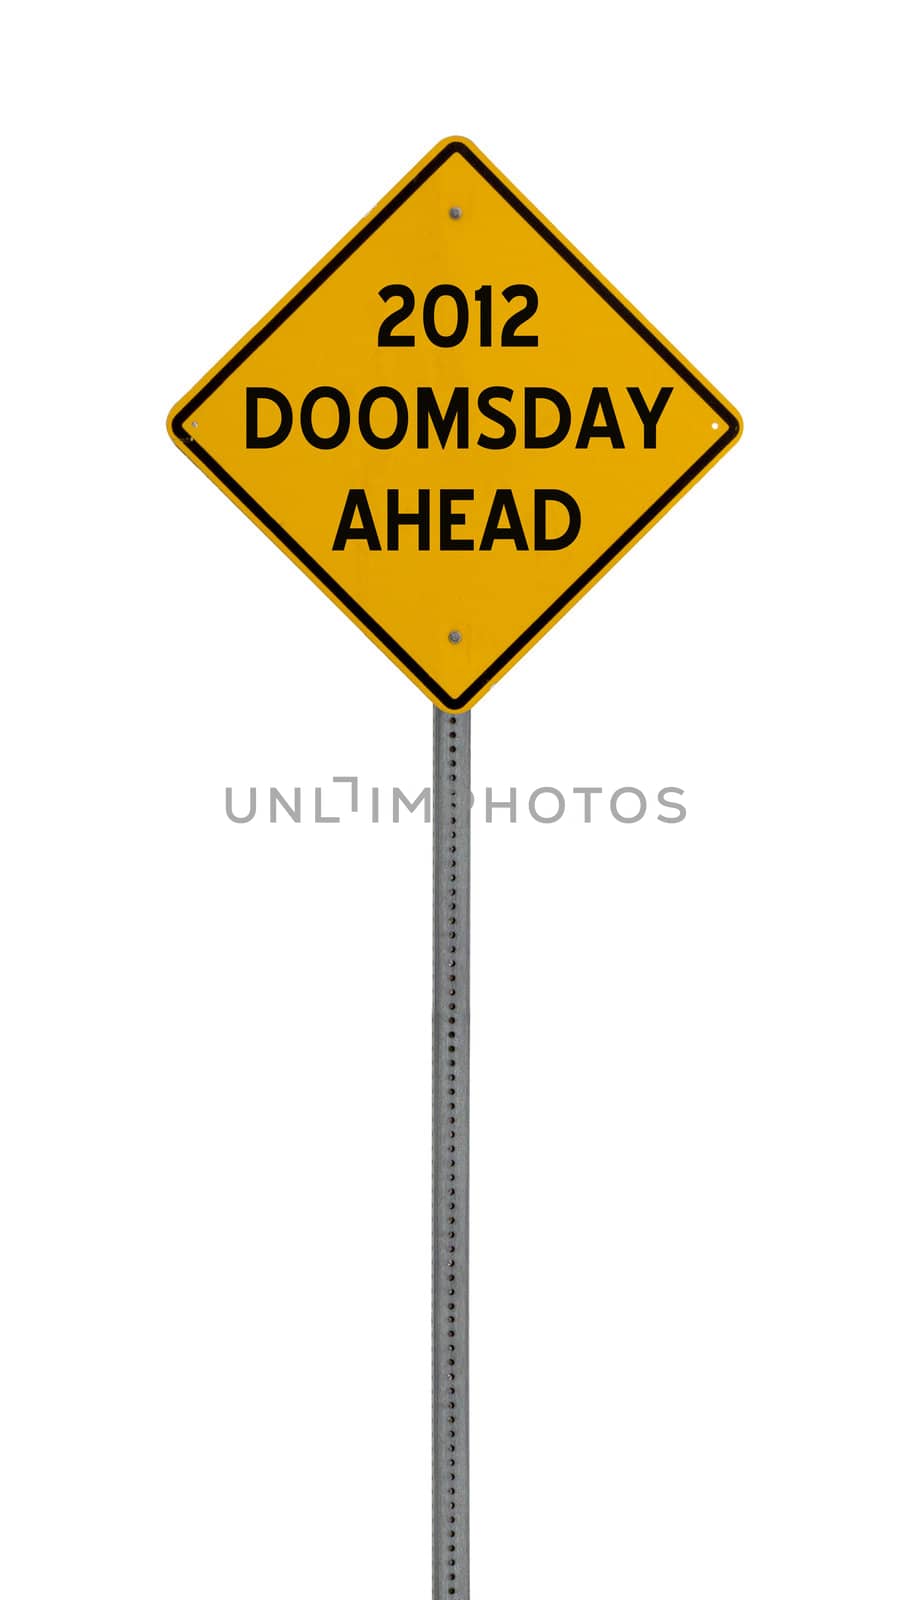 2012 doomsday ahead - Yellow road warning sign by jeremywhat